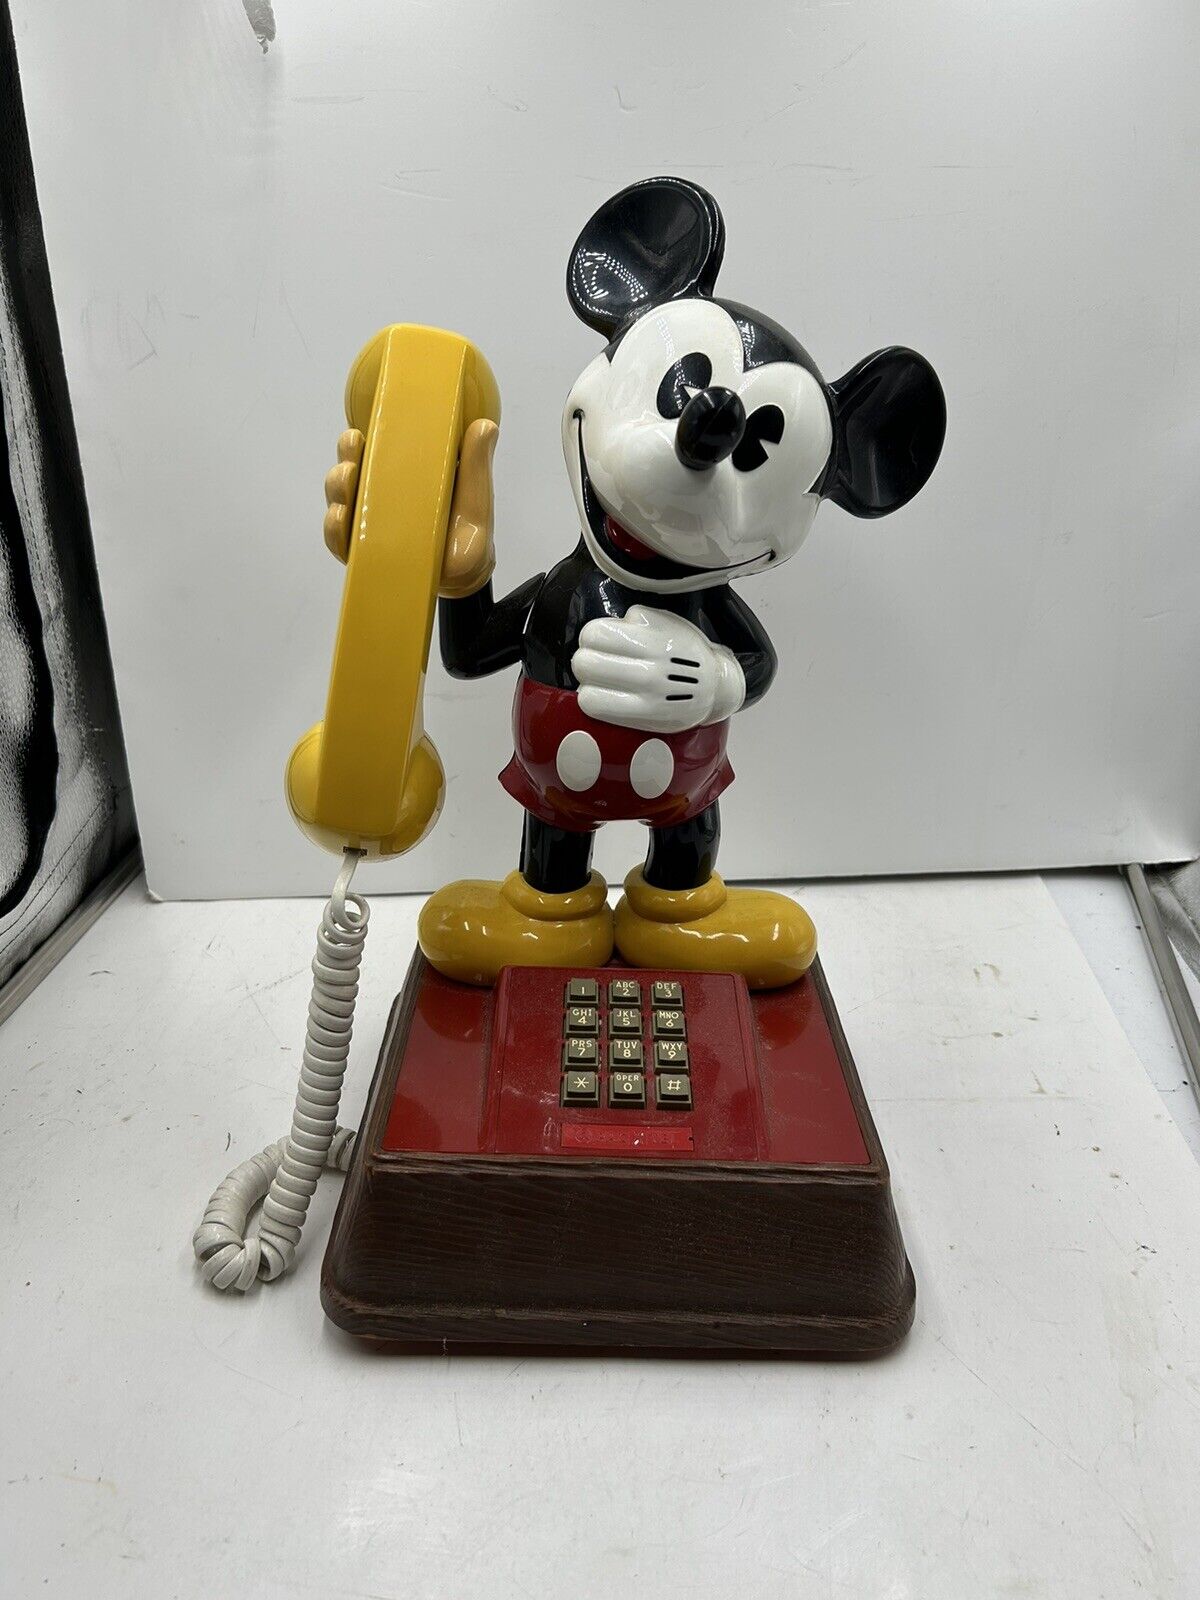 Vintage Pac Tel Comdial Mickey Mouse Telephone TEPF 8000 With Box And Manuals